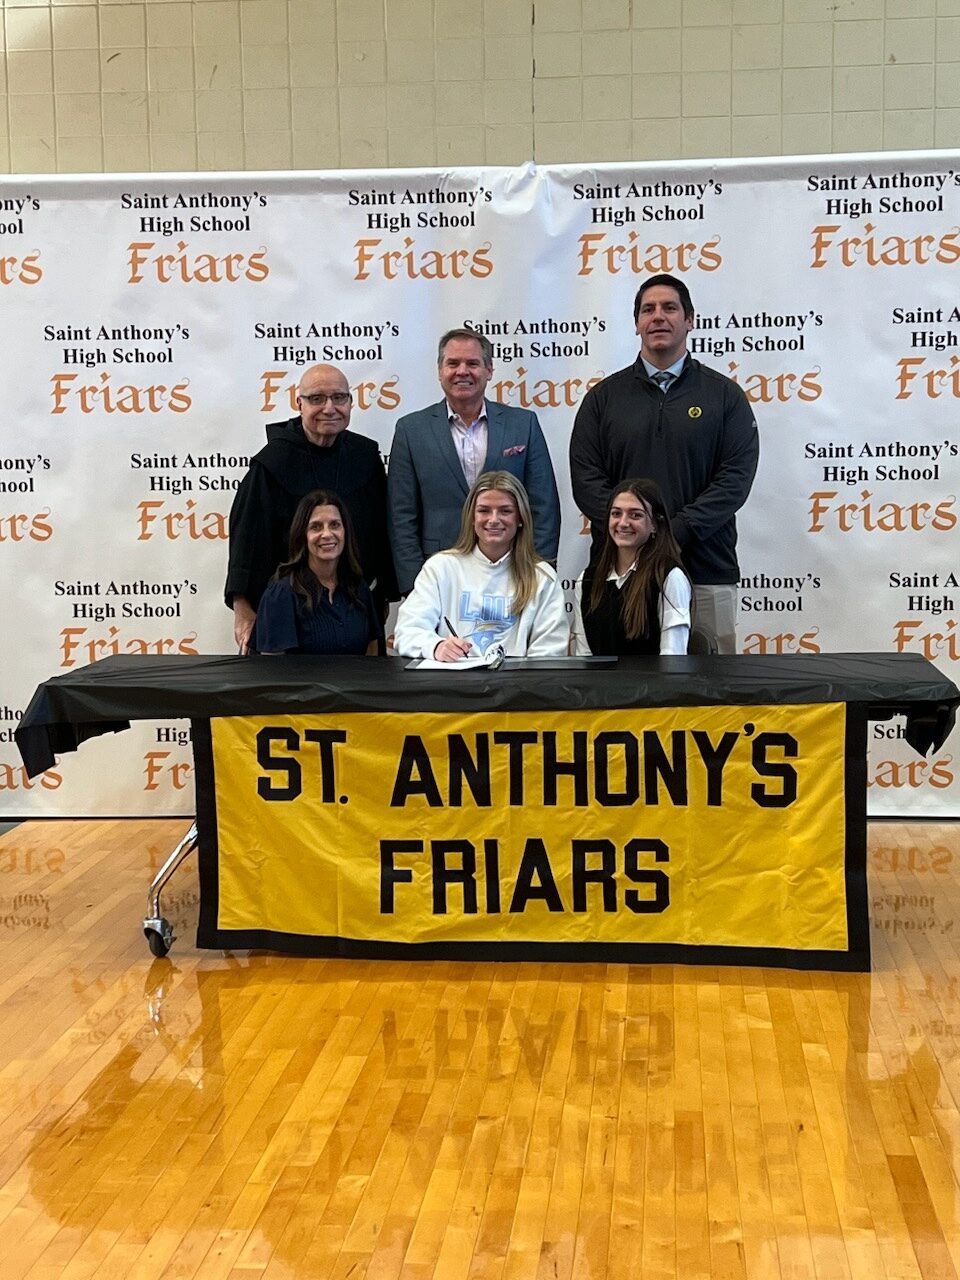 Sag Harbor resident Emma Rascelles, center, who attended Pierson High School through 10th grade before transferring to St. Anthony's, will play Division I lacrosse at Long Island University next year.